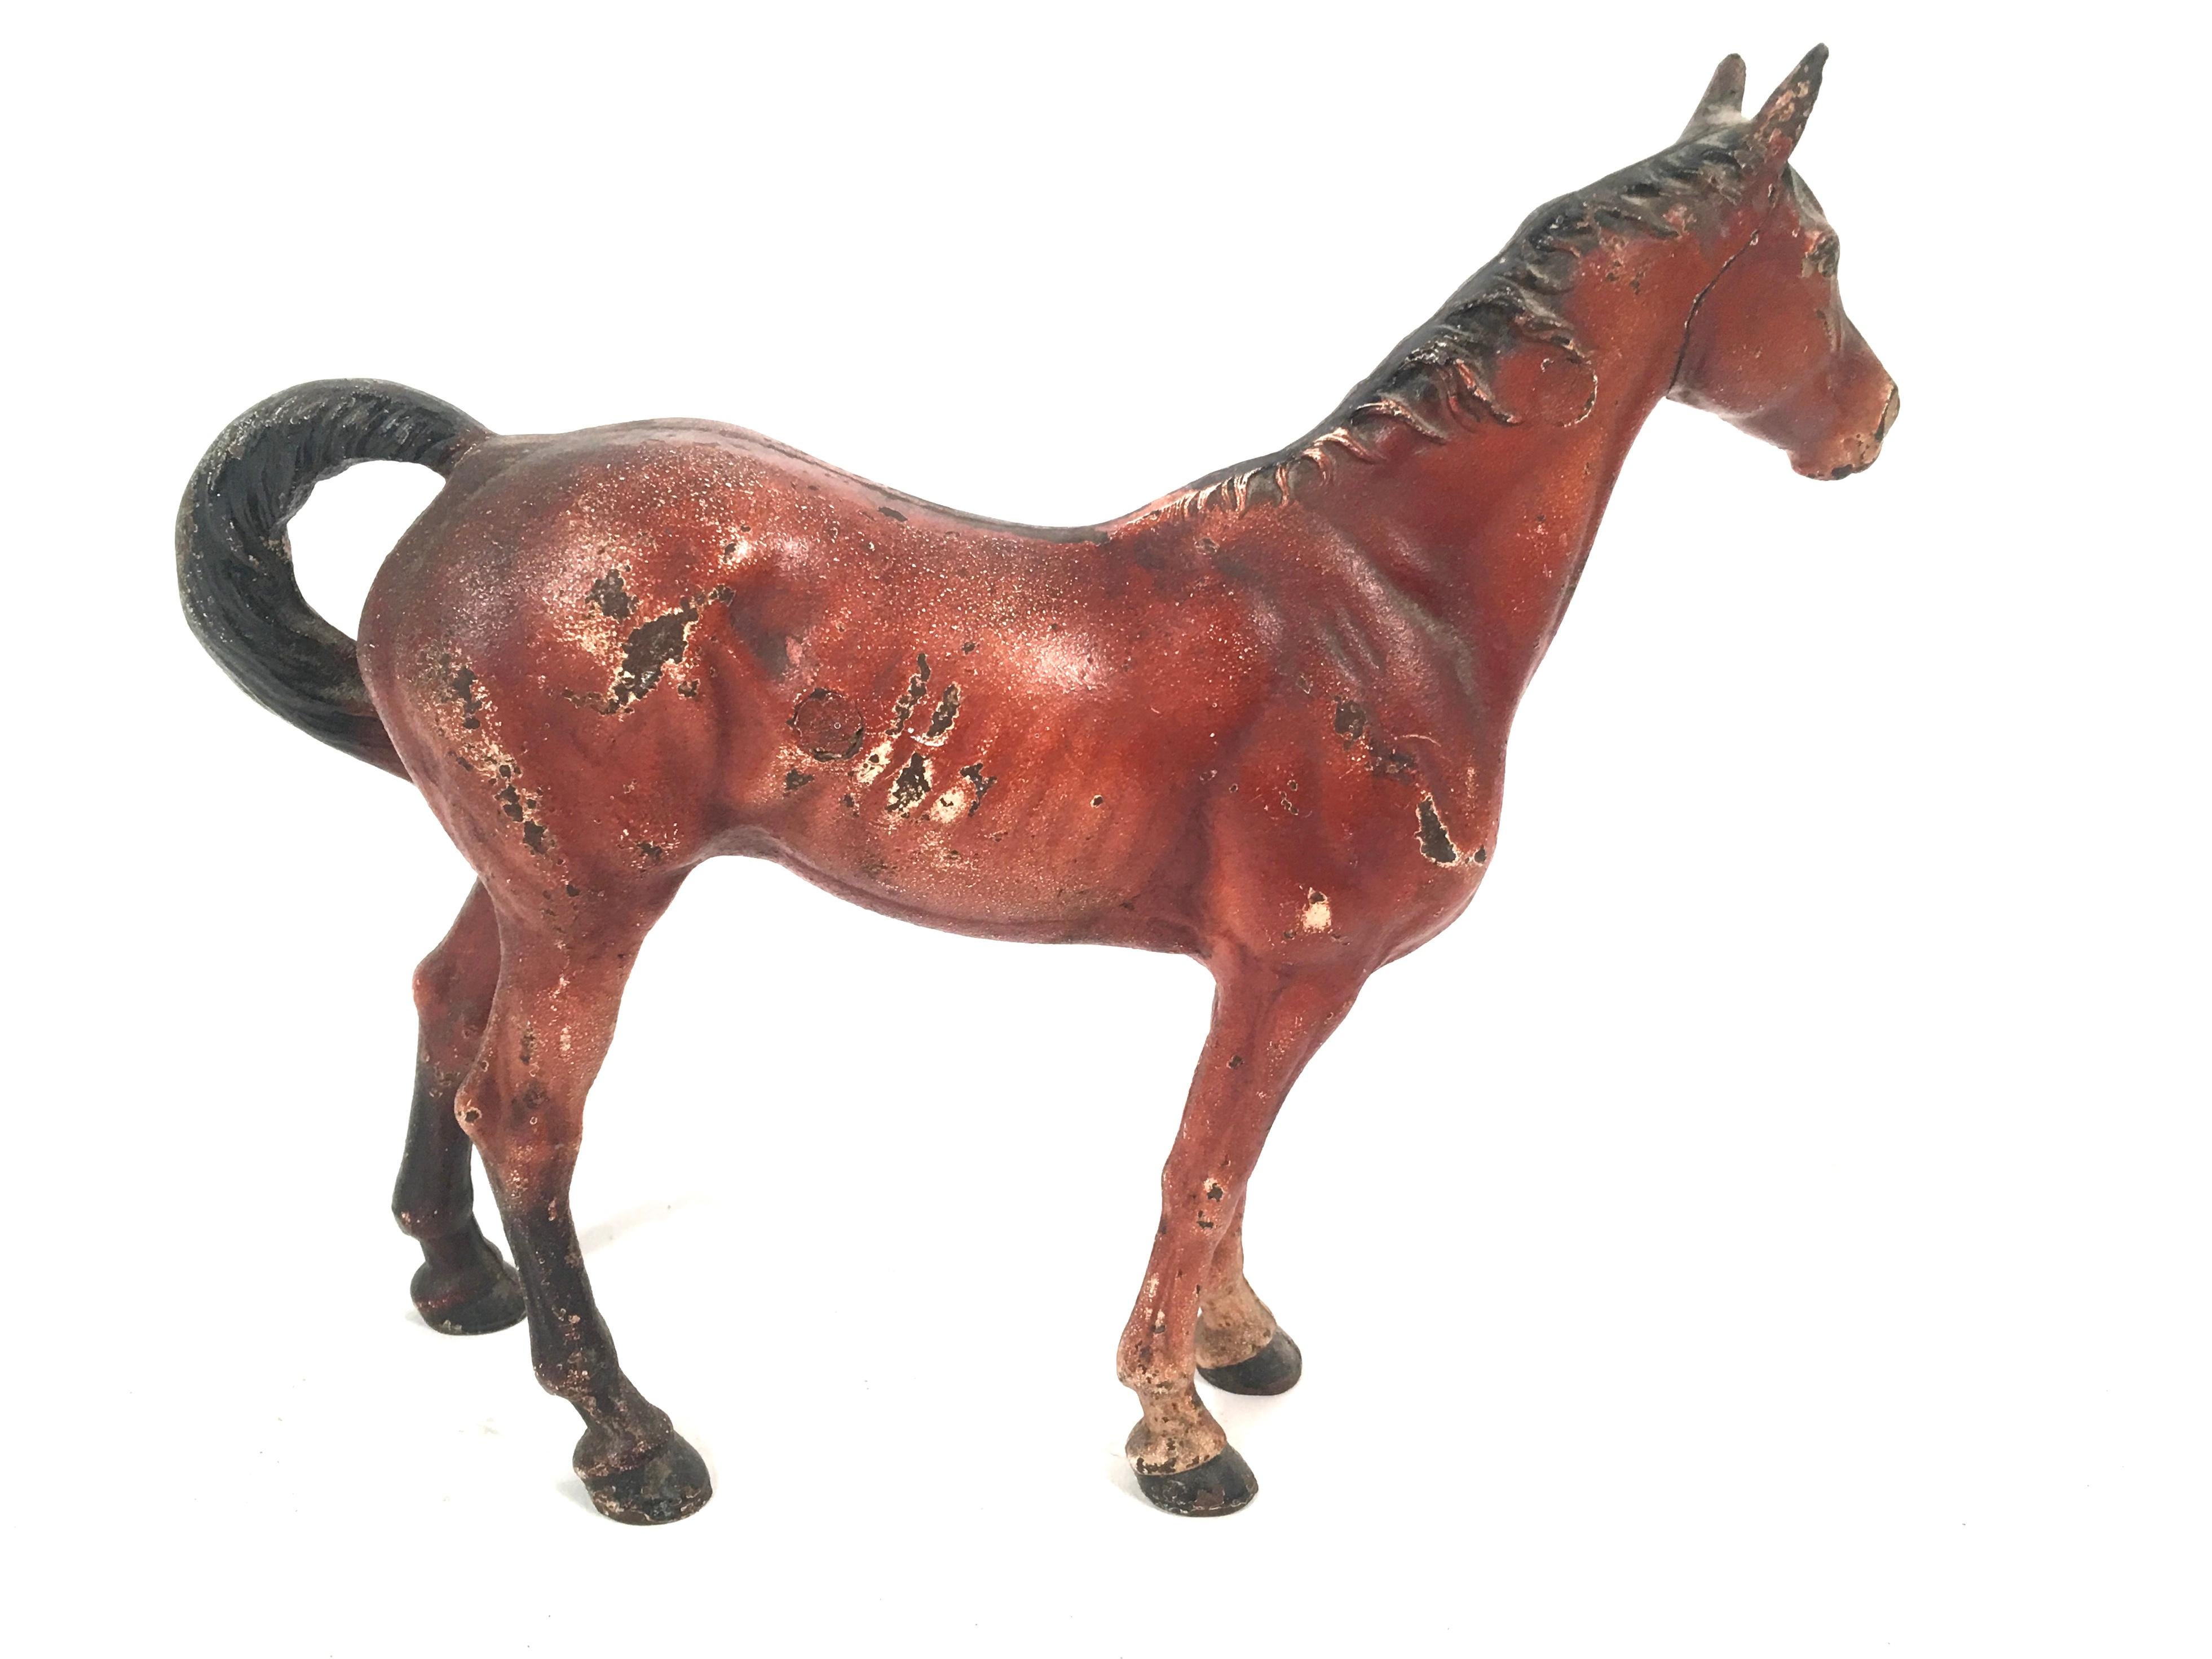 An antique painted cast iron figural horse door stop by the Hubley Manufacturing Company, American circa 1910. Substantial in weight and well modeled, retaining its original painted surface. Very functional as a doorstop or decorative as an